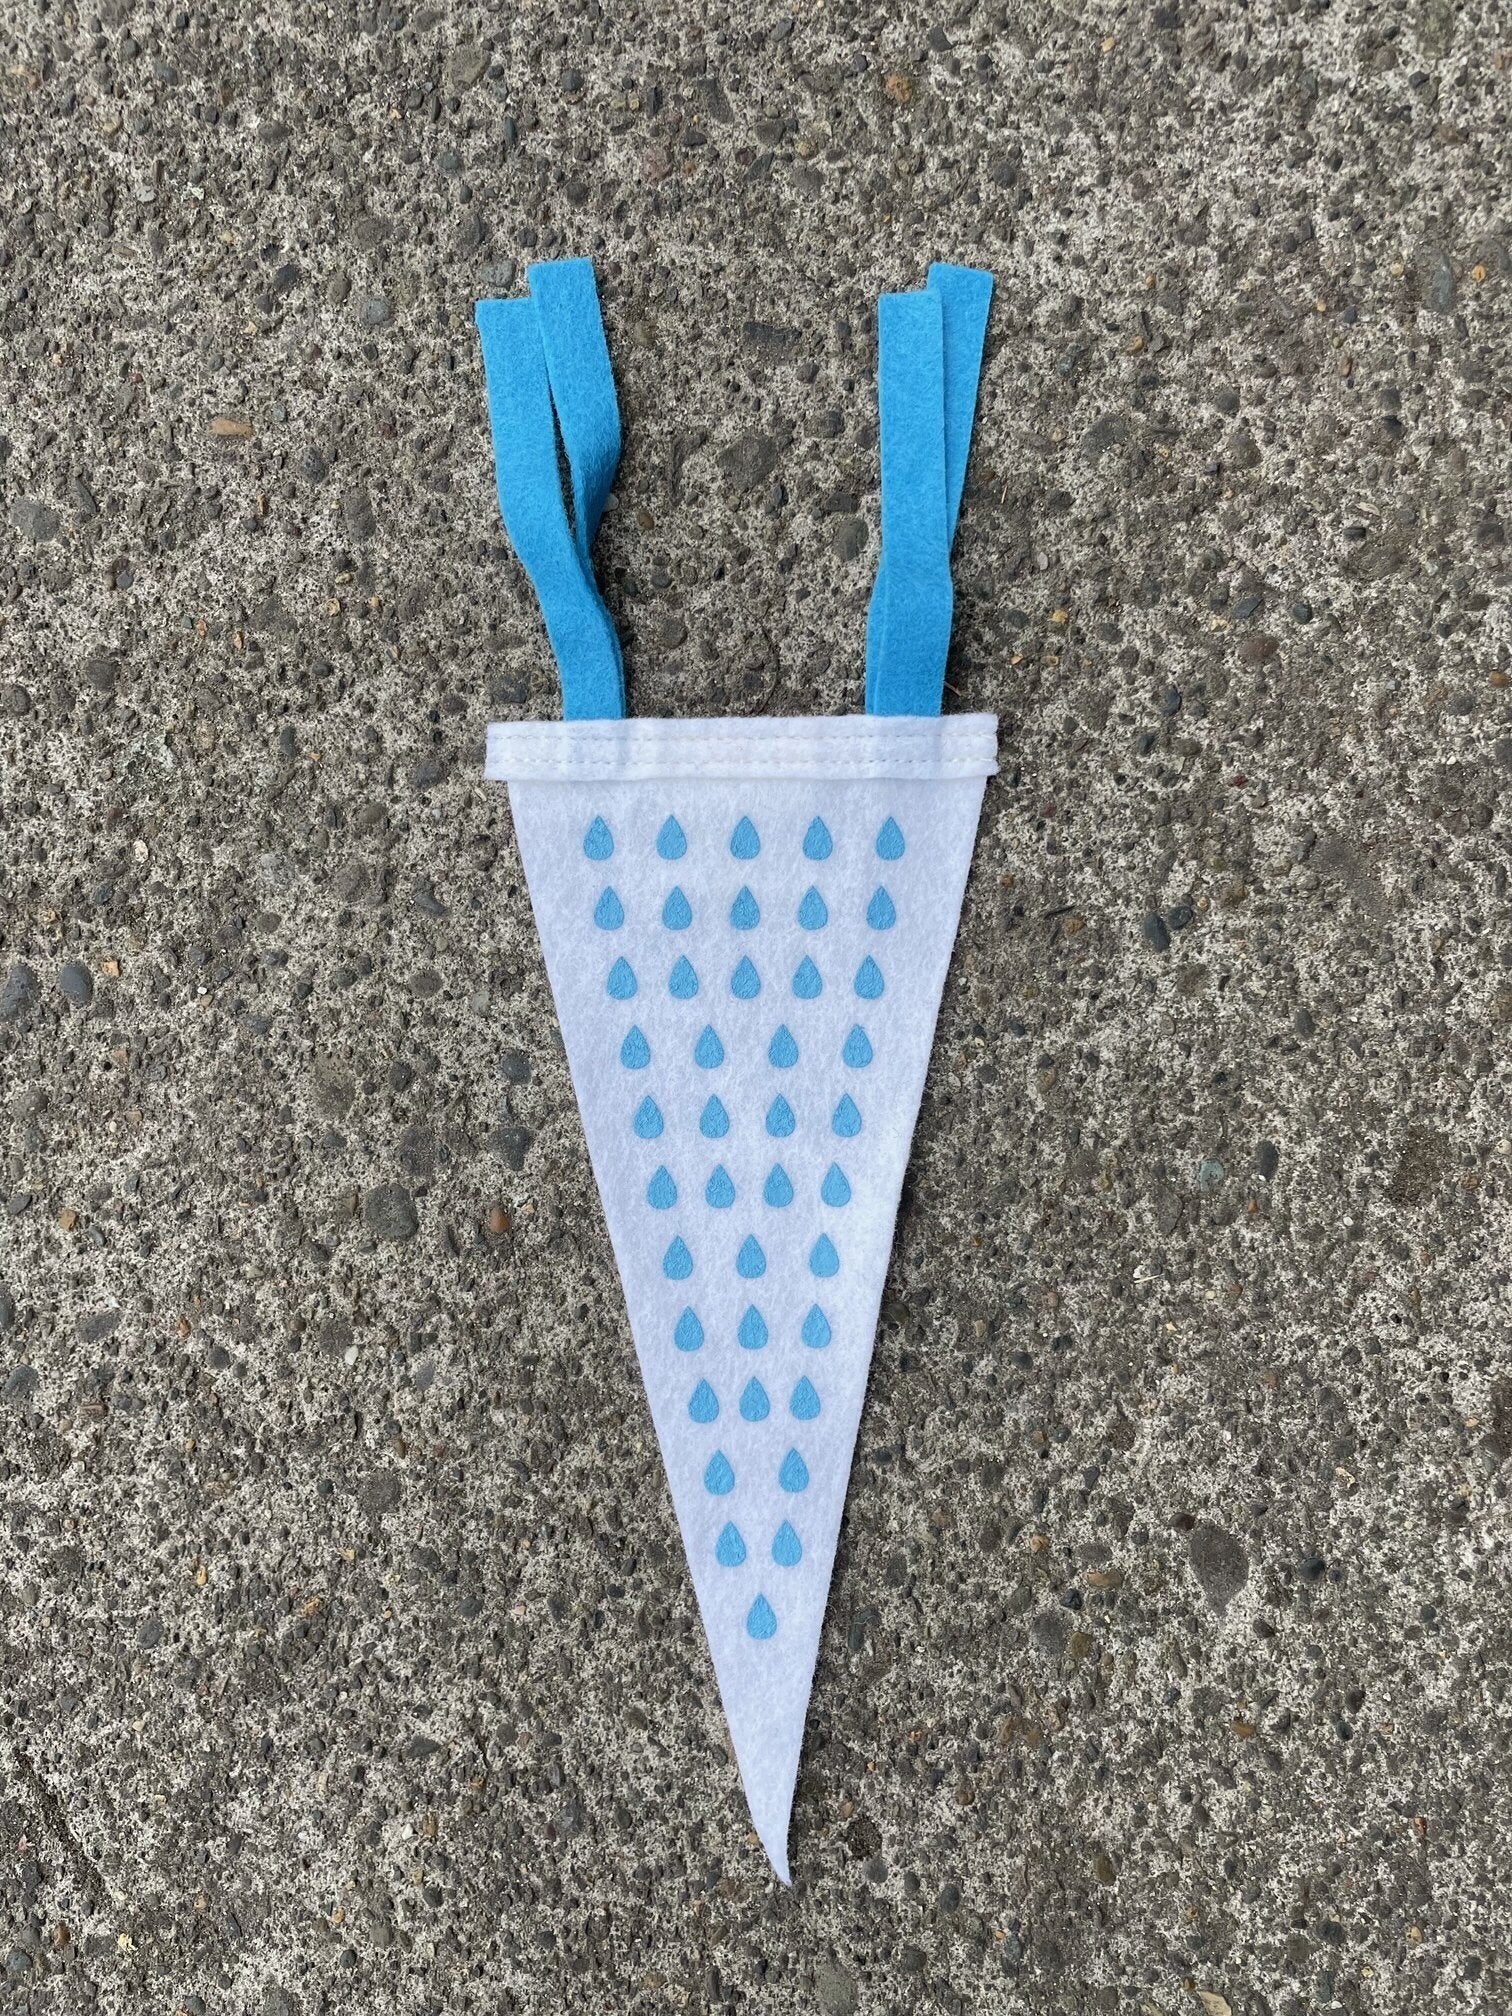 White pennant flag with lines of light blue raindrops.